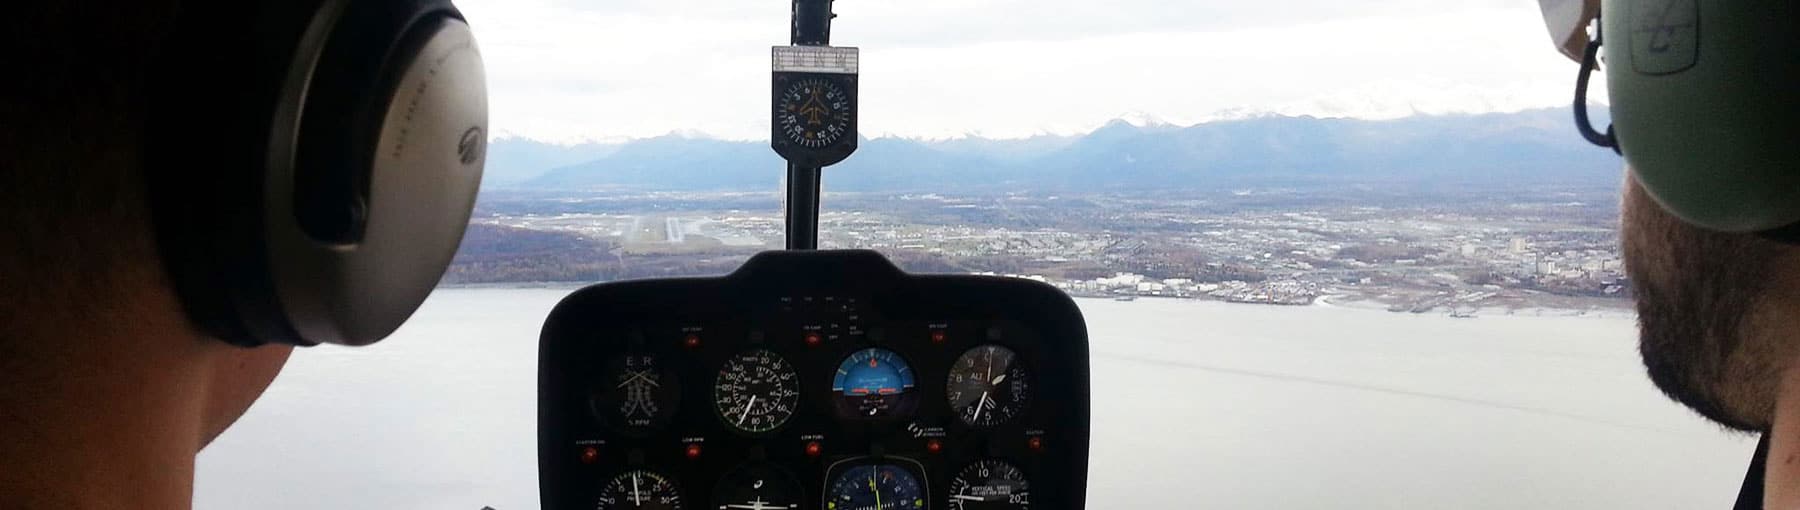 View of inside helicopter cockpit from behind two pilots with Anchorage below.